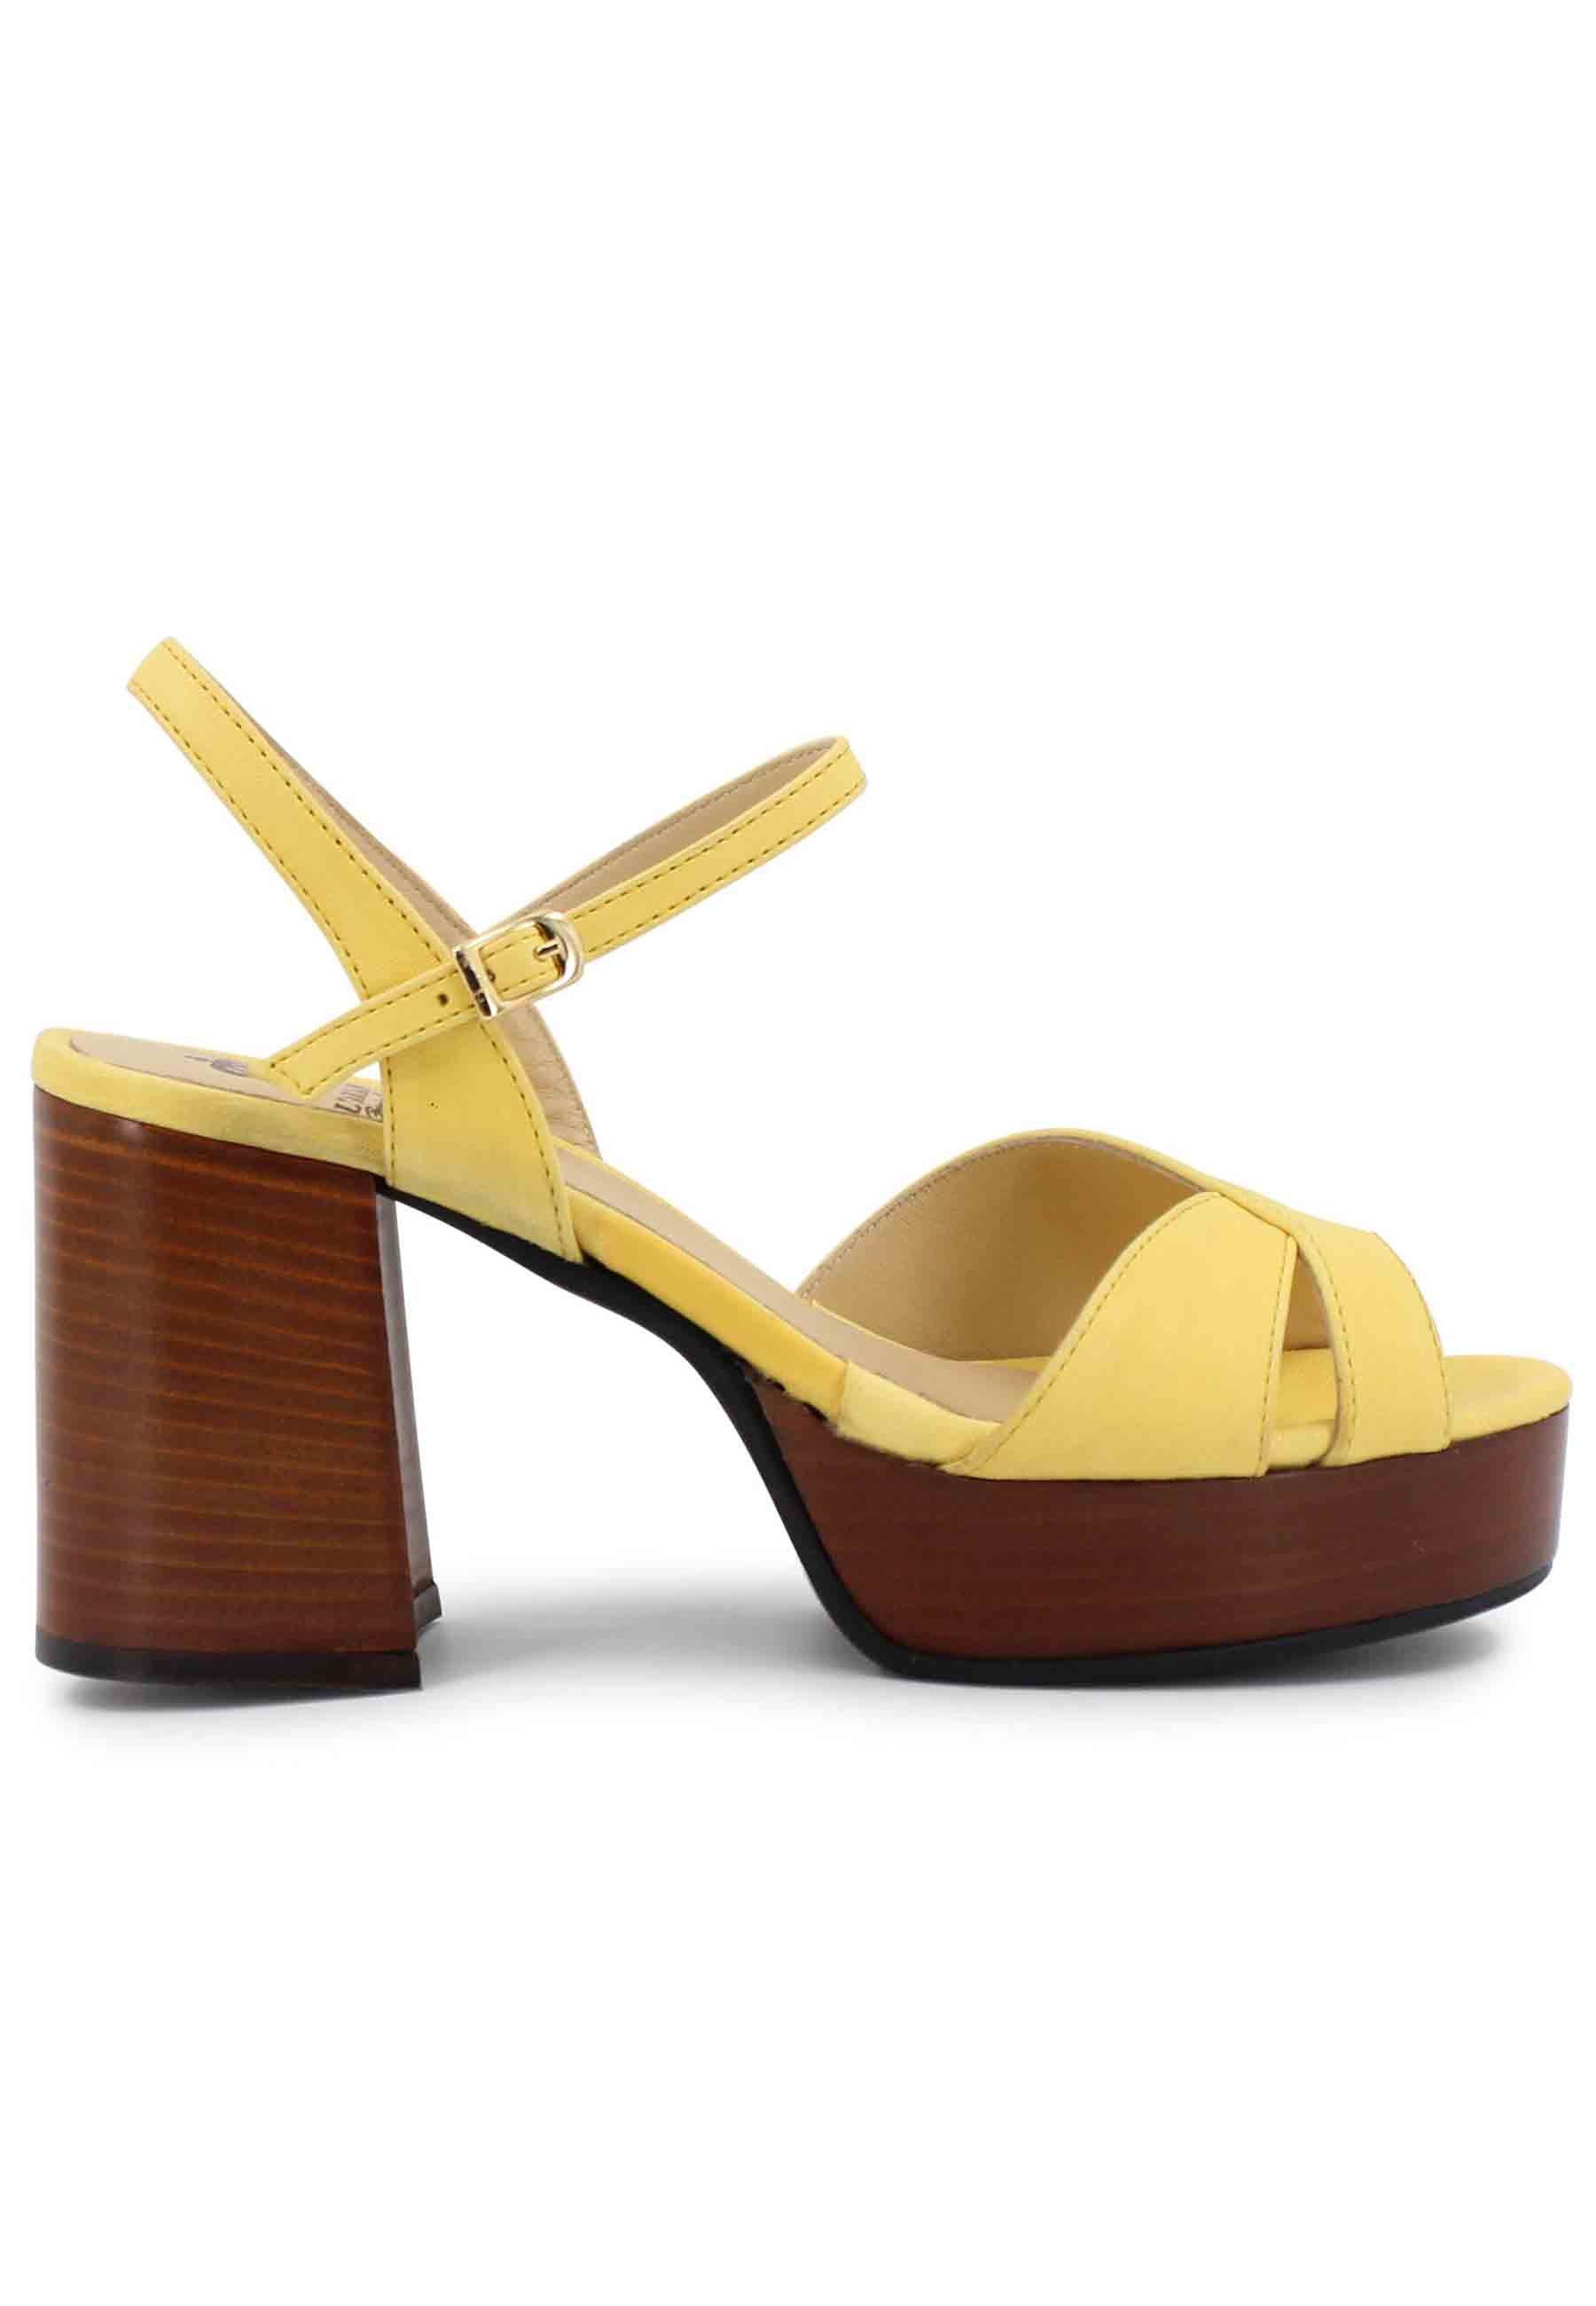 Women's yellow leather sandals with strap and leather heel and platform